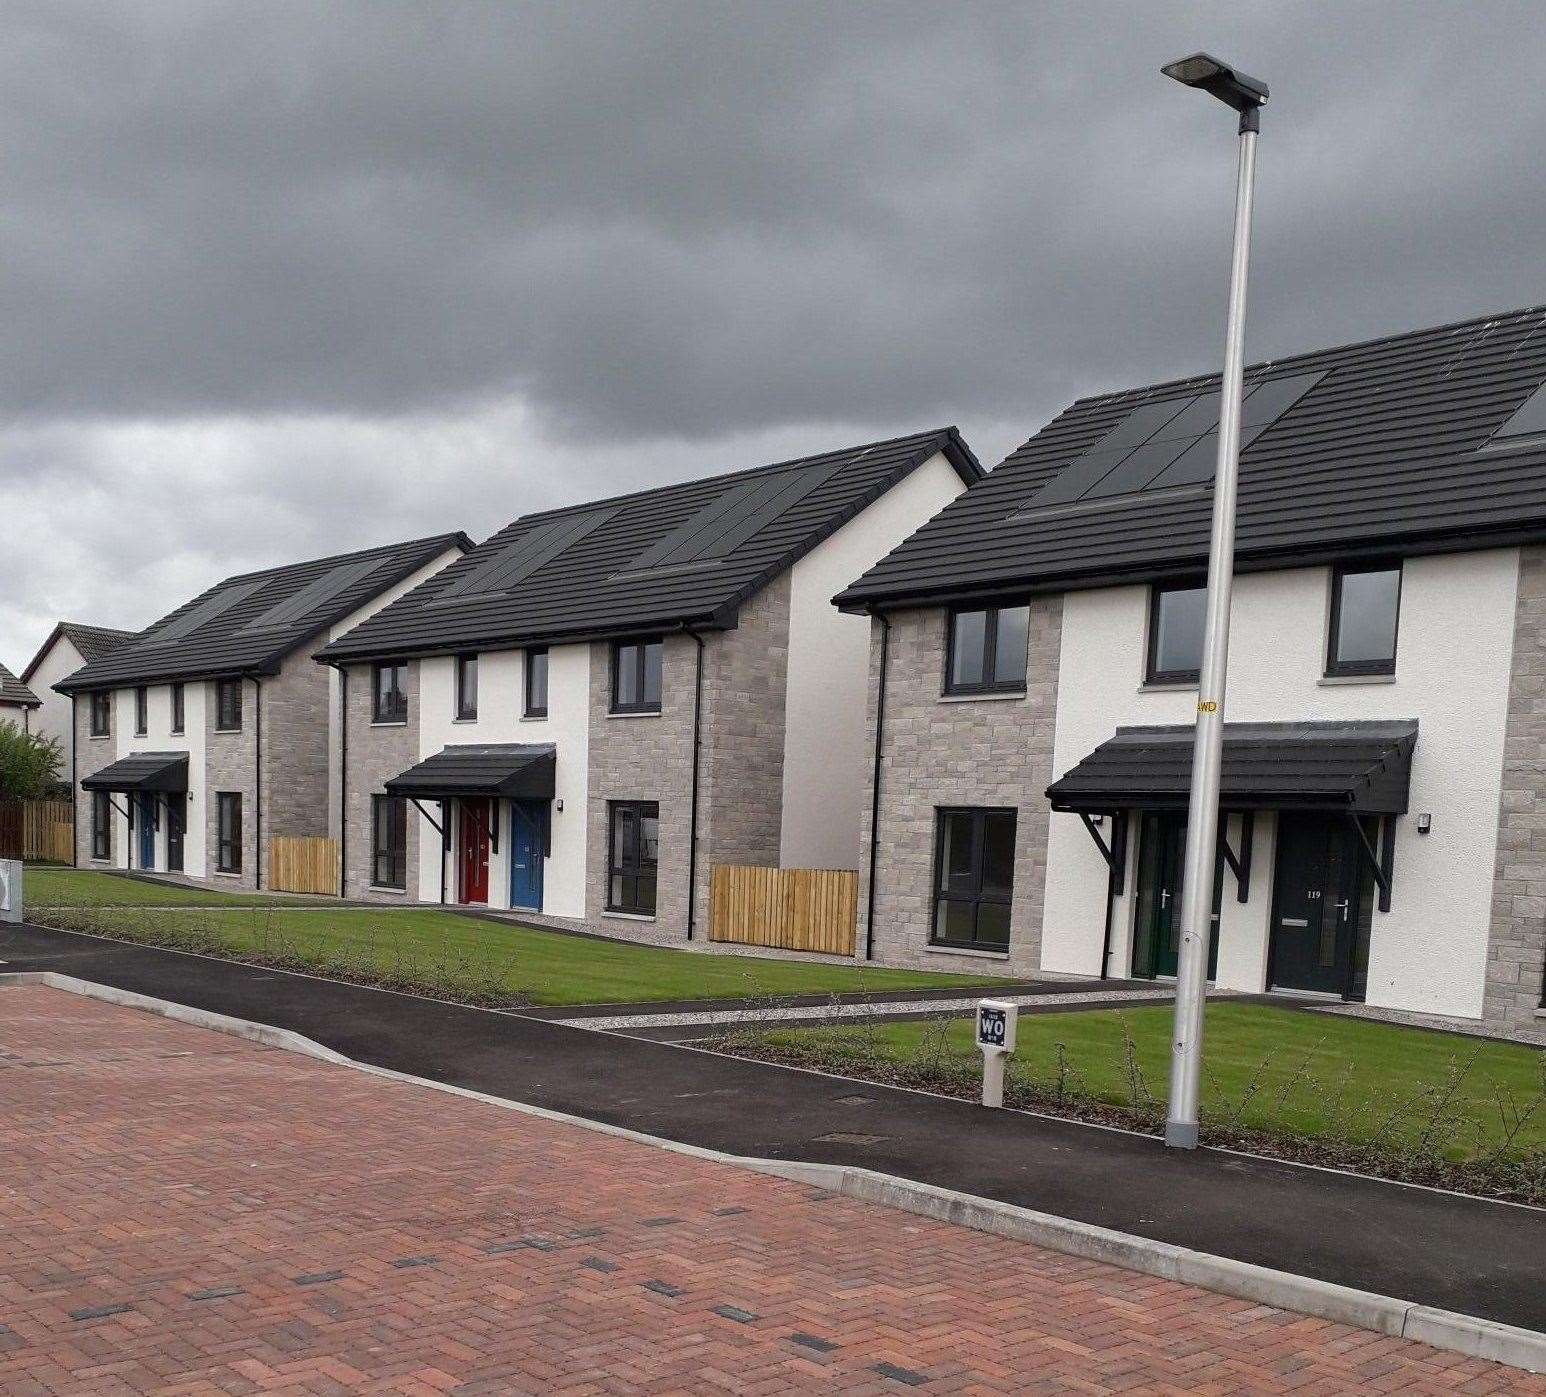 Seventeen new homes have been added to the Highland Council's stock of rental properties.